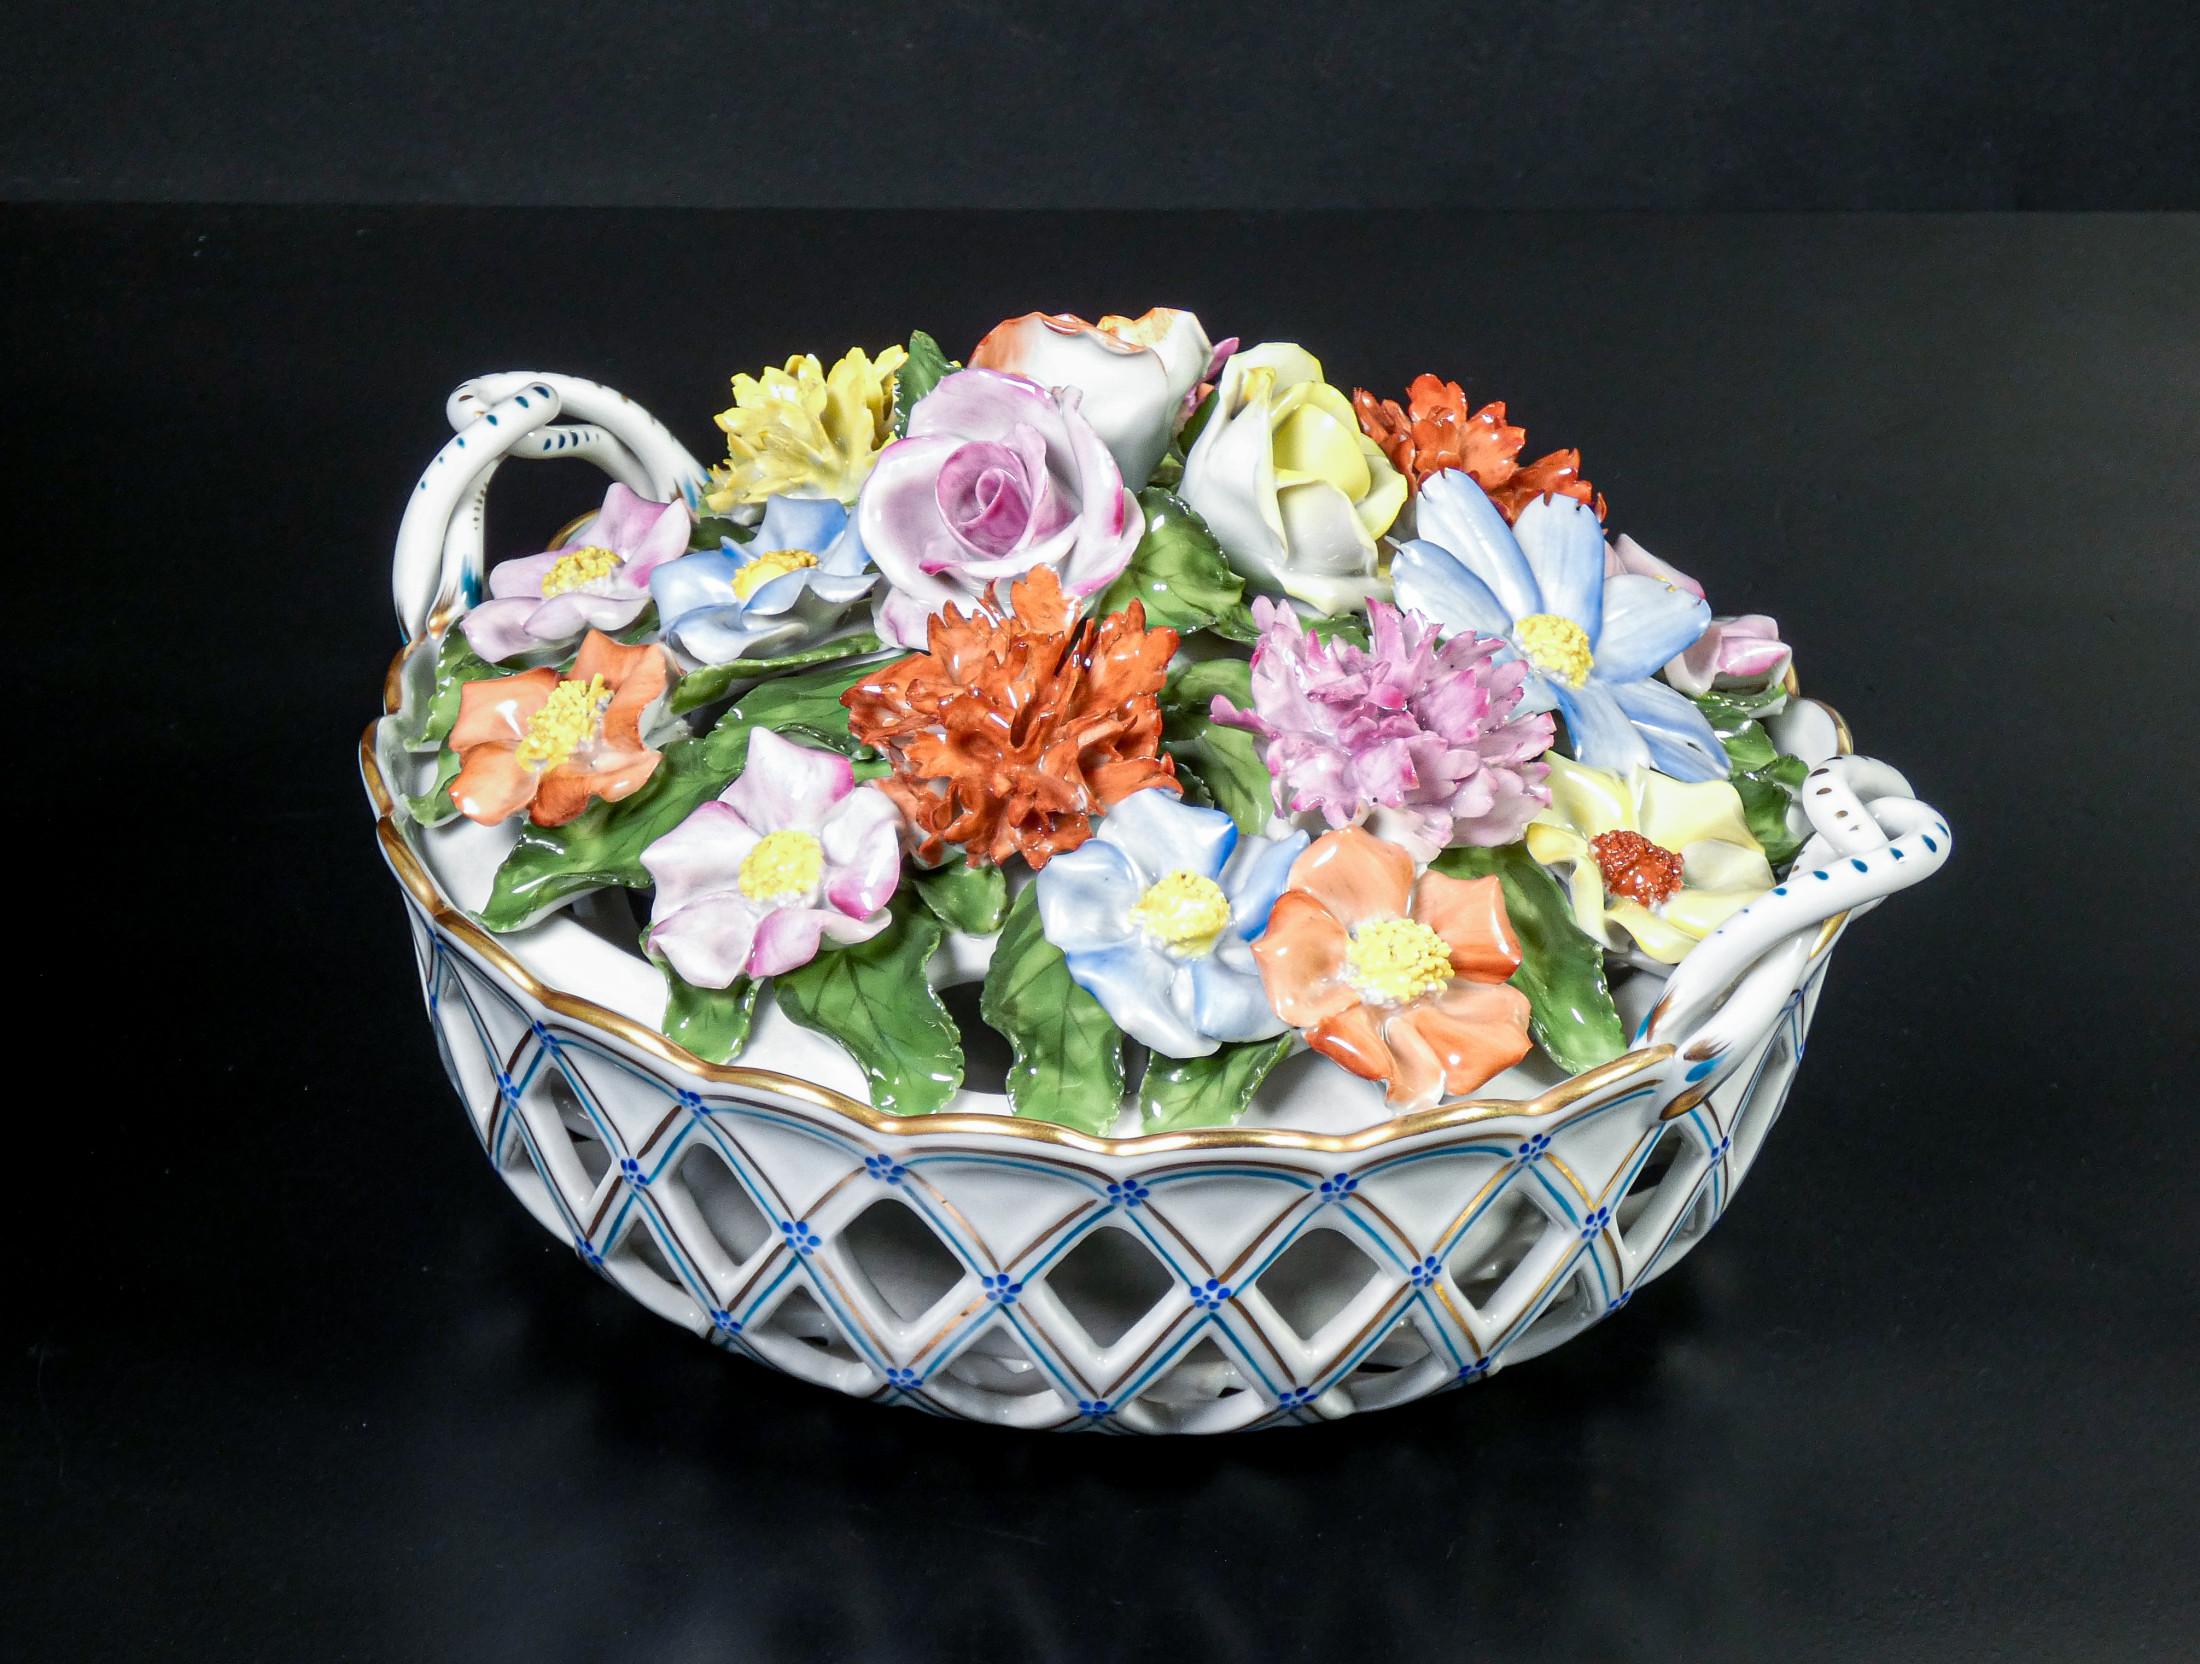 HEREND - Hungary
Flower Basket,
Hand modeled and painted ceramic

ORIGIN
Hungary

PERIOD
Twentieth century

MODEL
Flower Basket

MATERIALS
Hand modeled
and painted ceramic

MANUFACTURE
HEREND - Hungary
Handpainted

DIMENSIONS
L